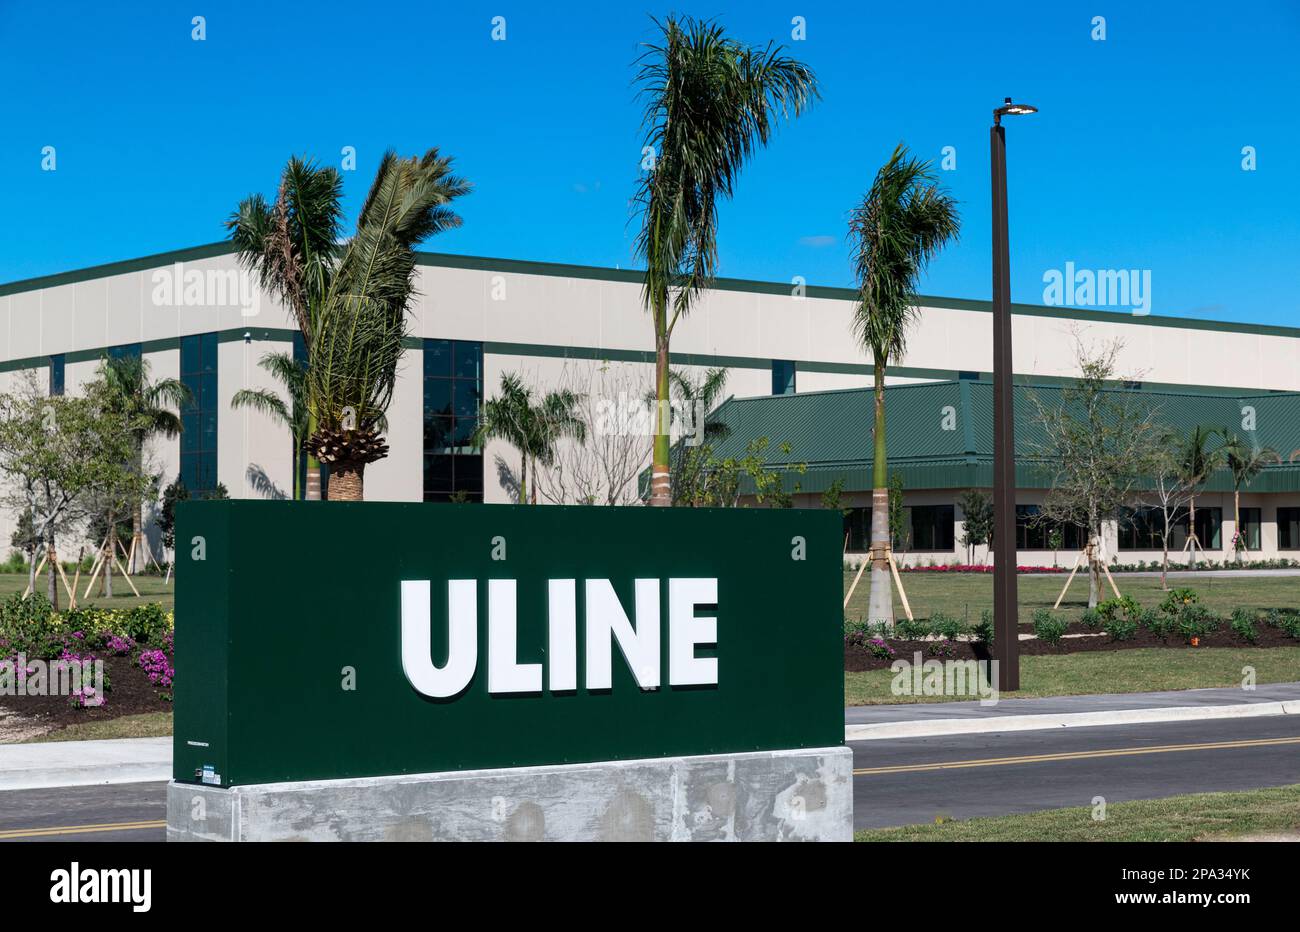 Uline is a leading distributor of shipping, packaging and industrial supplies. Warehouse in Naples, Florida, USA. Stock Photo